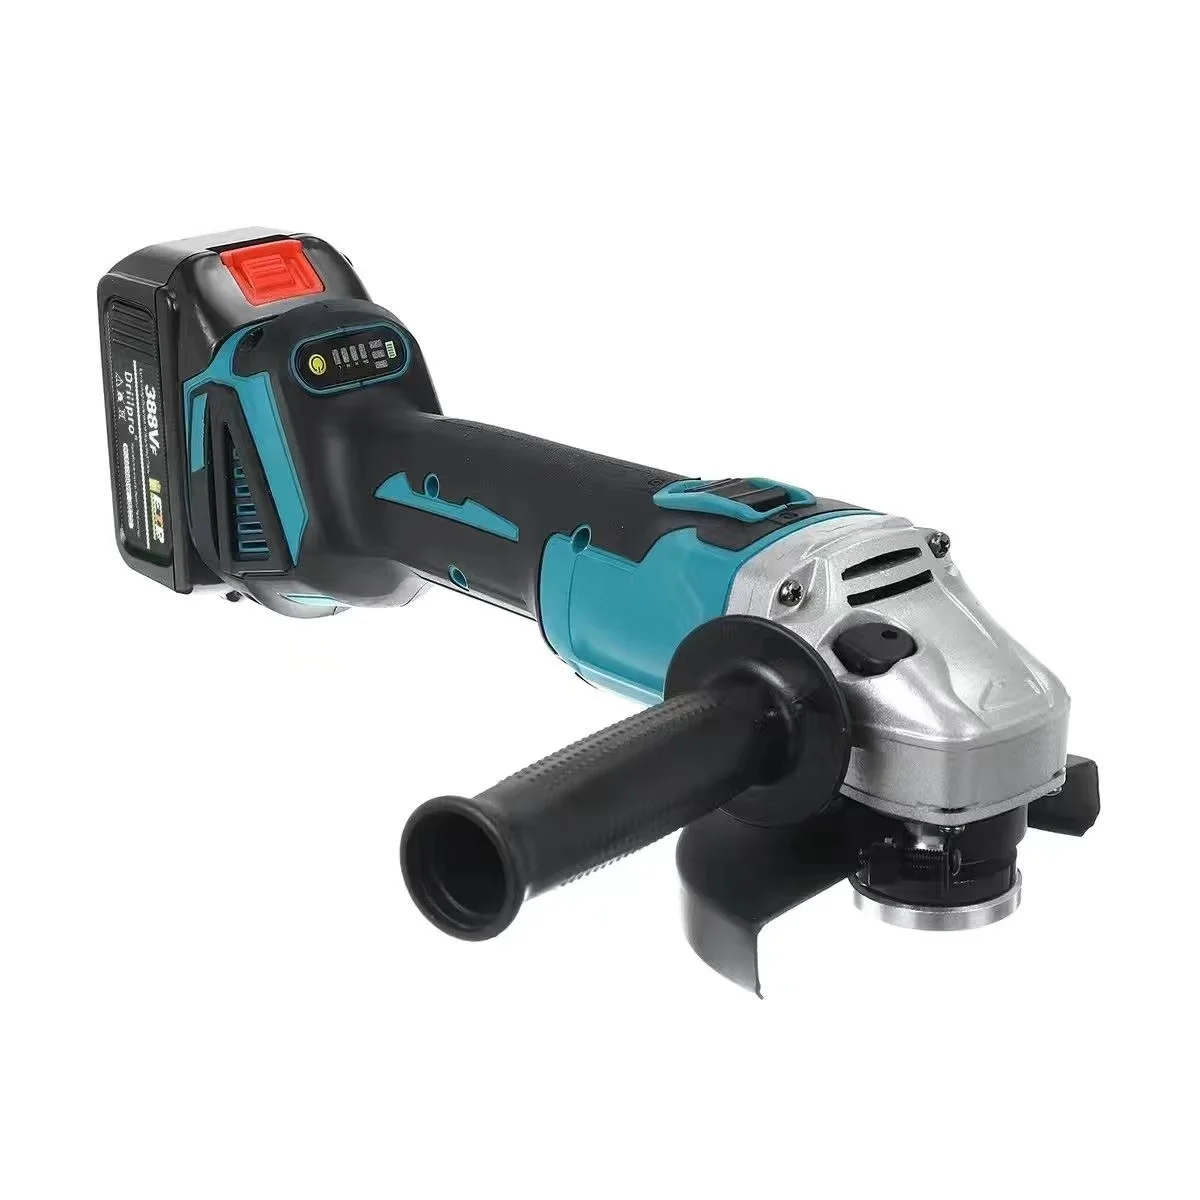 18V 100mm Brushless Impact Angle Grinder Cordless Cutting Machine Polisher Power Tools compatible For Makita Battery 7 2v cordless mini angle grinder rechargeable lithium battery brushless polishing machine diamond cutting power tools